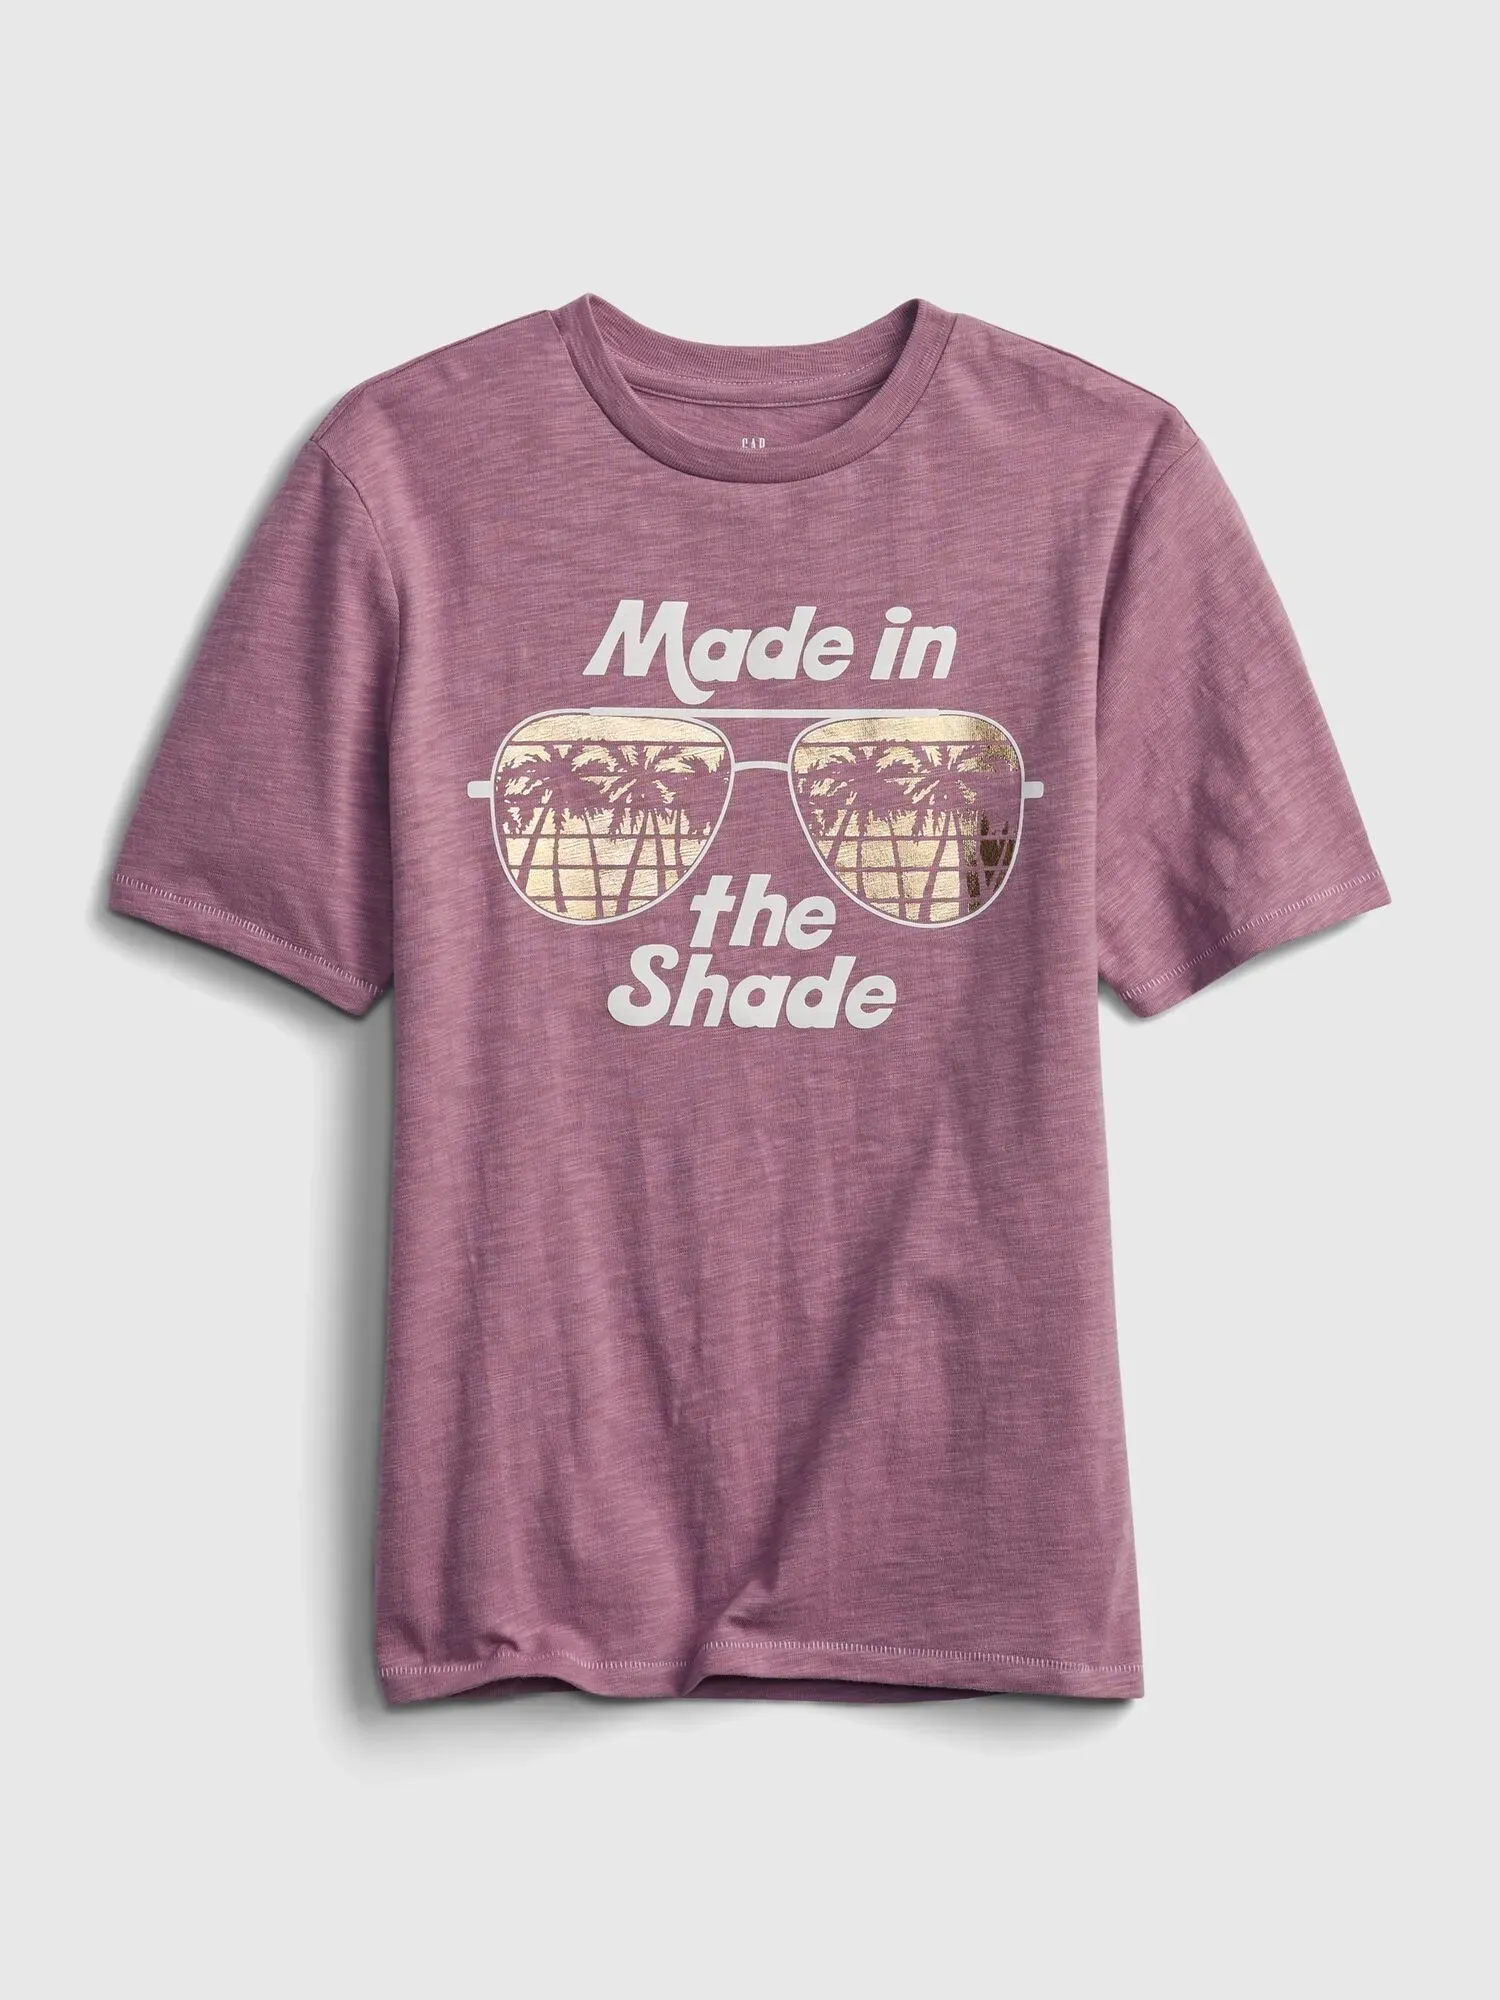 Faded red tshirt with an image of sunglasses and the phrase 'Made in the Shade' printed on to it